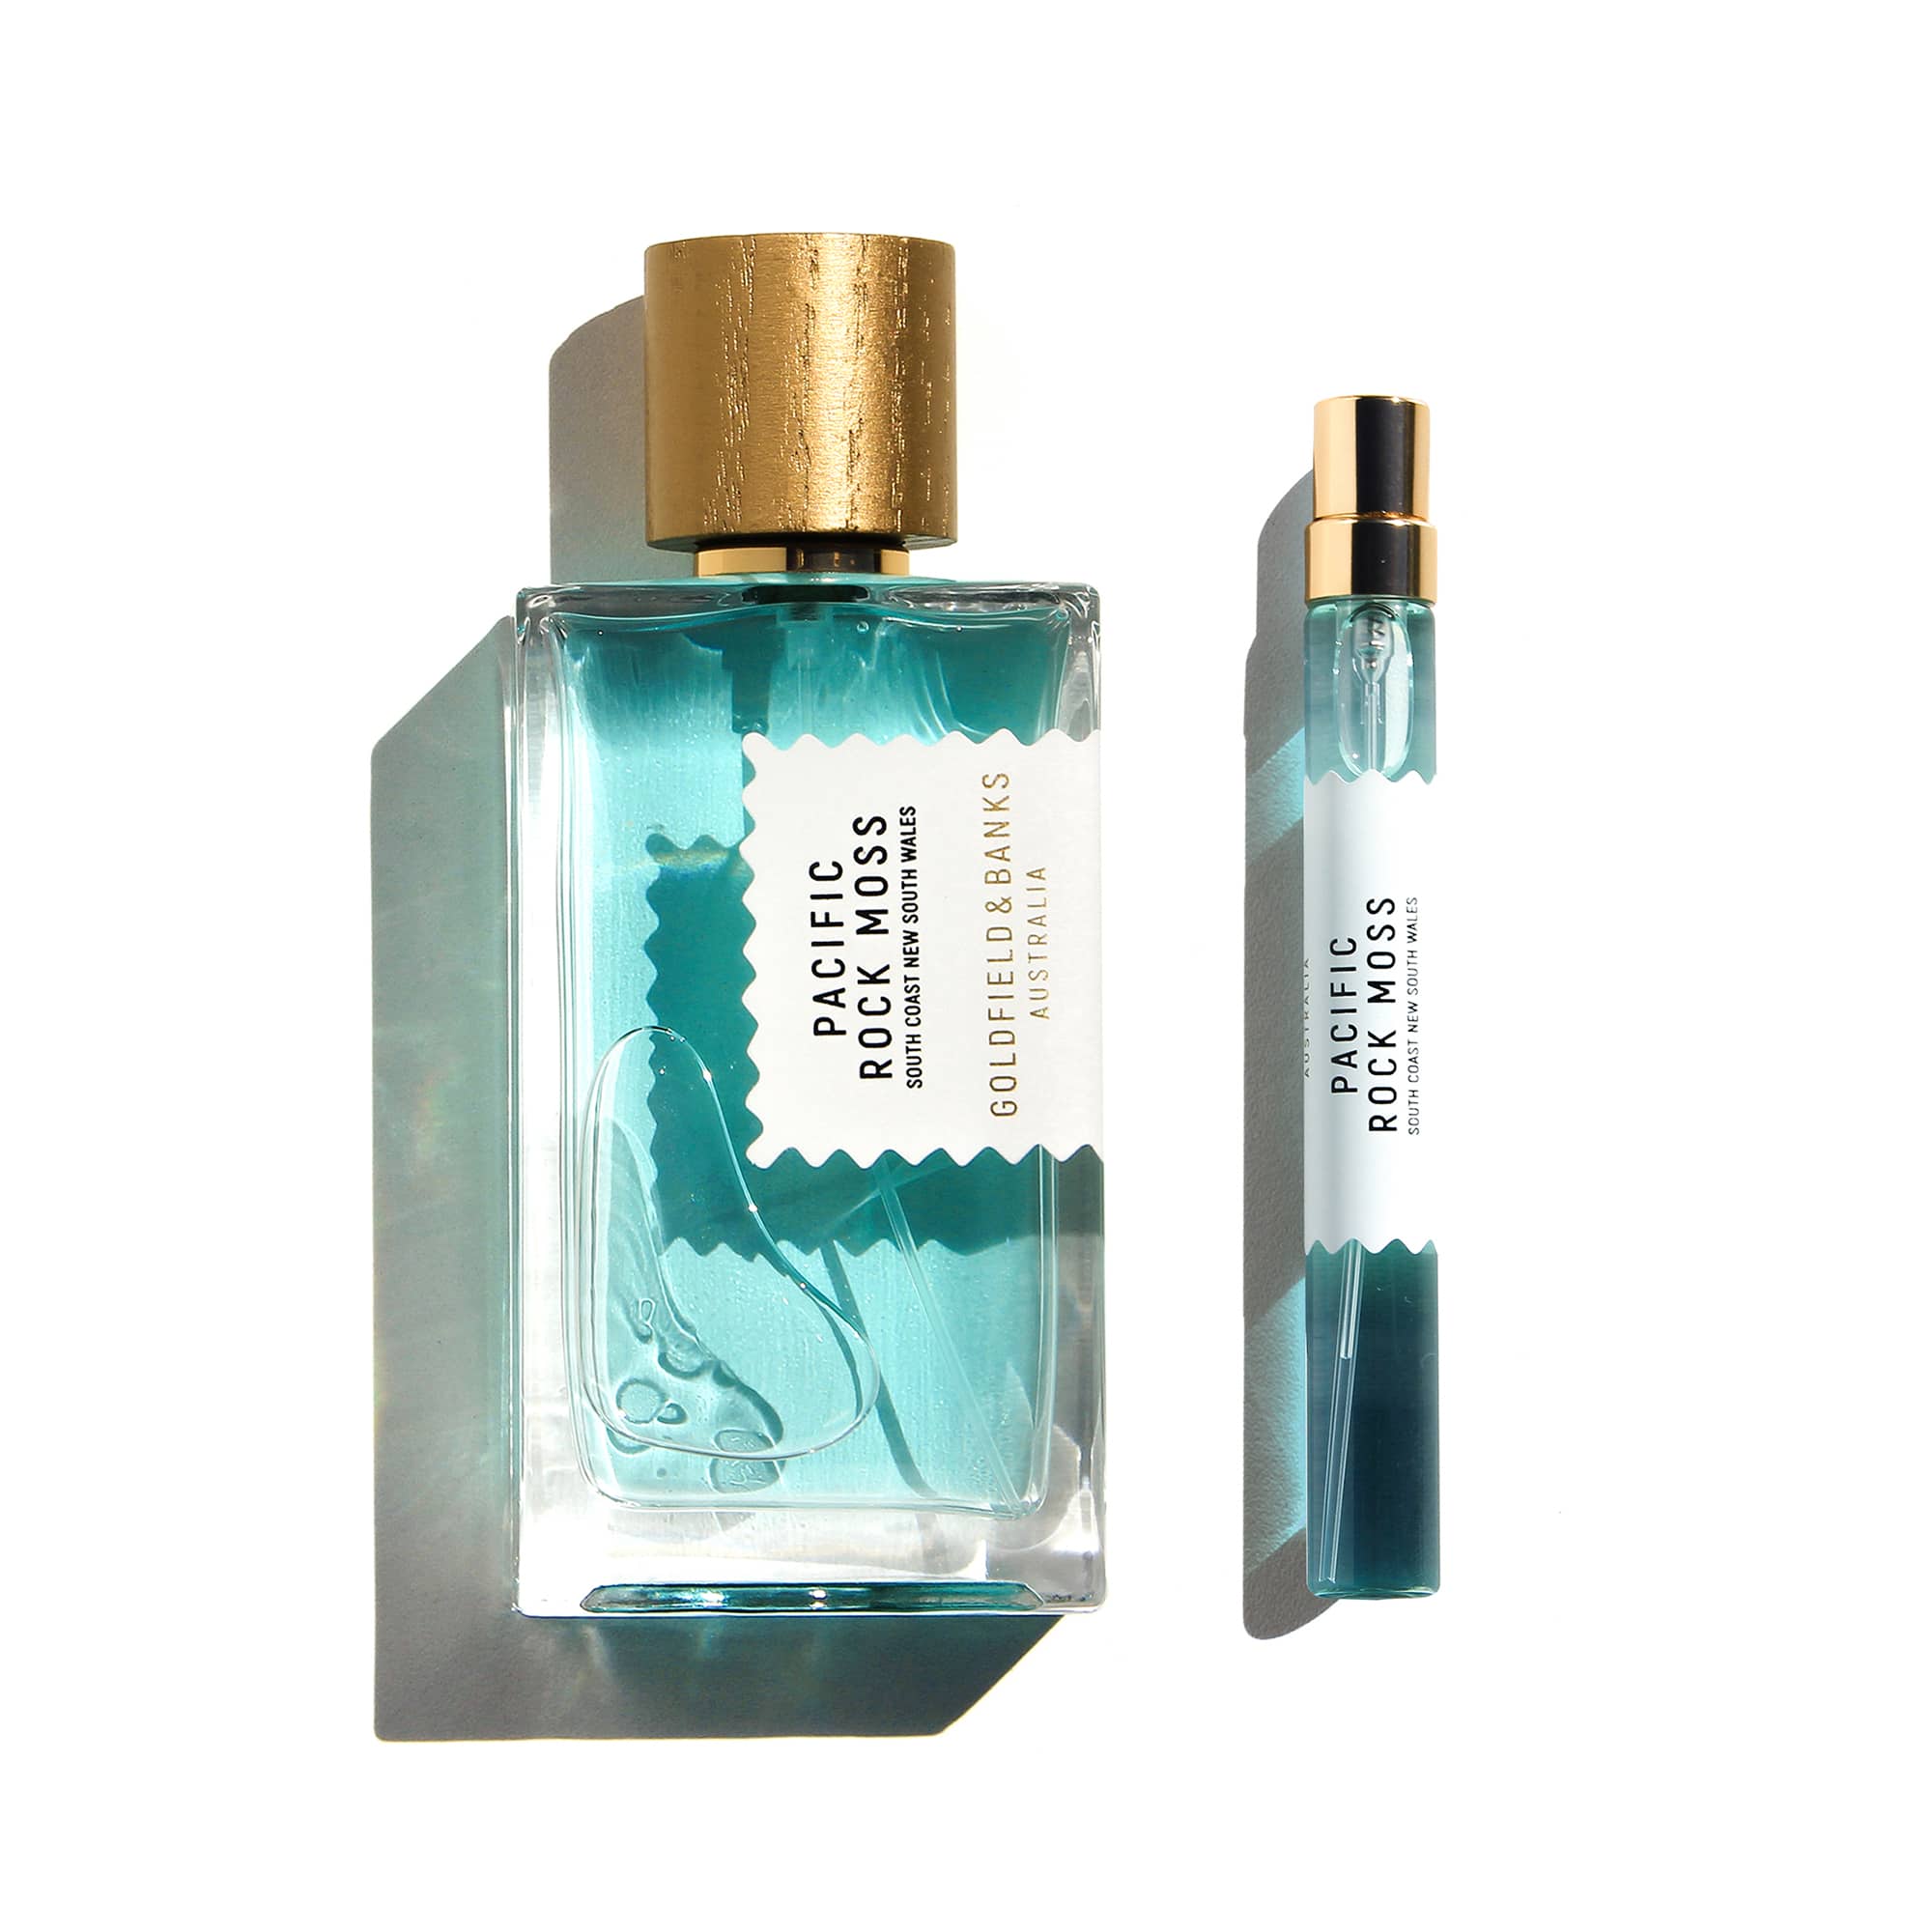 BEON.COM.AU Seize the day and experience a moment of pure bliss with this aquatic and fresh perfume. A distinctive marine note, graced with aromatic essences brings you on a lush coastal walk on a perfect summer day. Cedar wood gives this perfume a sturdy base on which to reveal a fresh, sea spray scent that... Goldfield & Banks at BEON.COM.AU